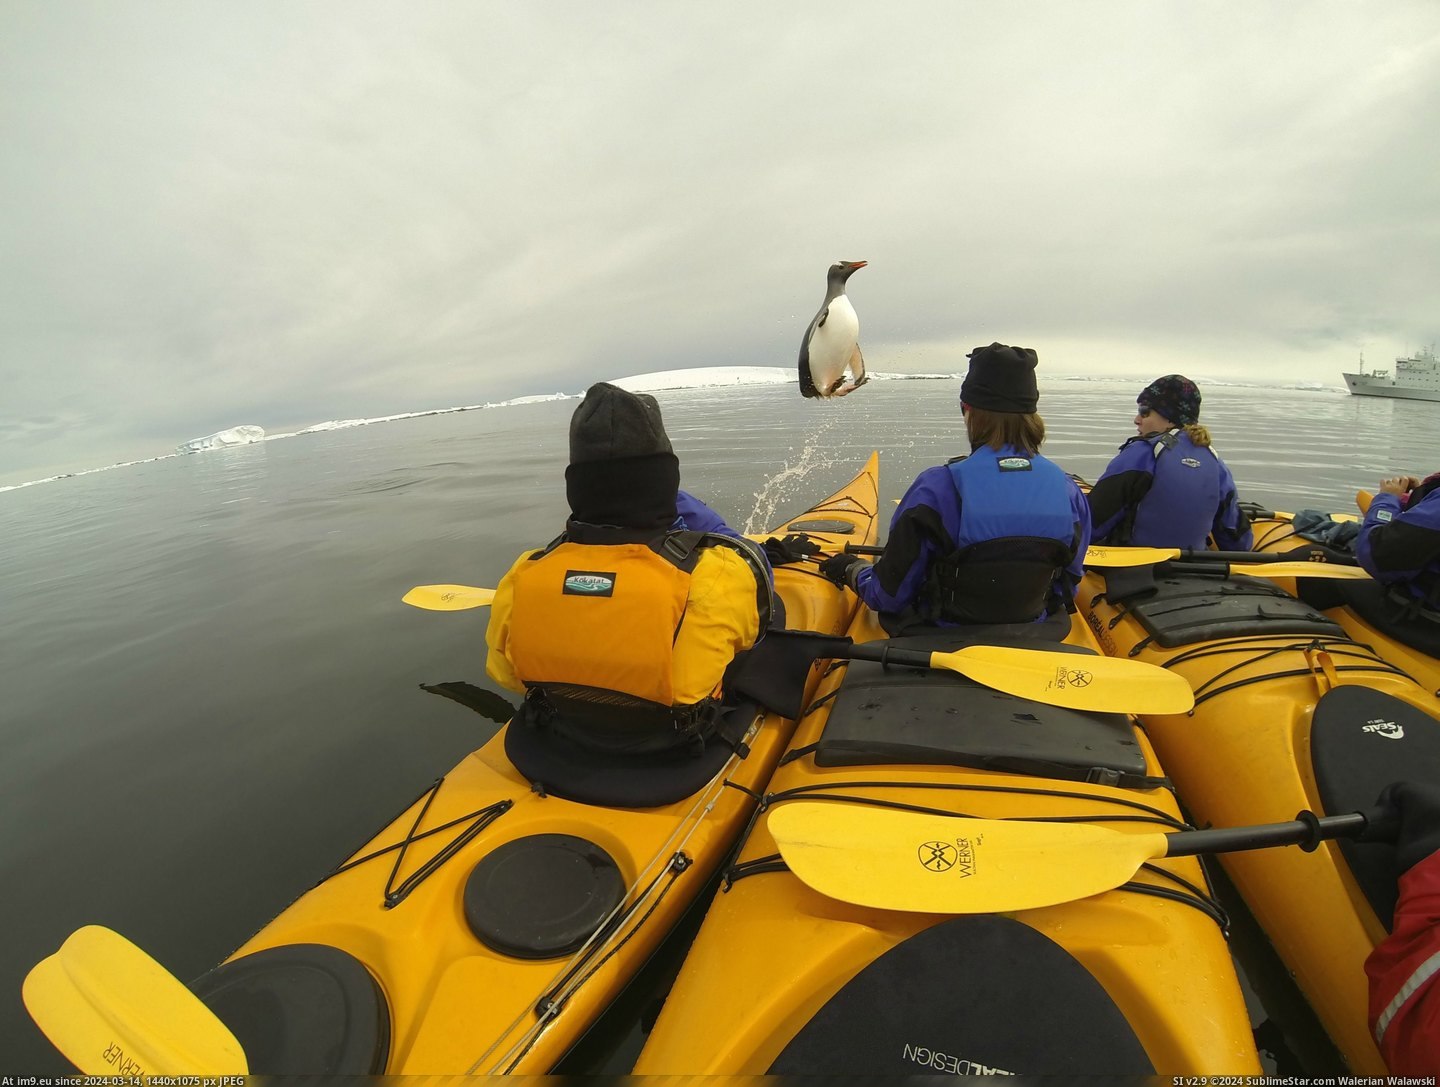 #One #Caught #Group #Antarctica #Kayakers #Trip #Jumping #Penguin [Pics] One of the Kayakers on my recent trip to Antarctica caught a penguin jumping into their group. Pic. (Изображение из альбом My r/PICS favs))